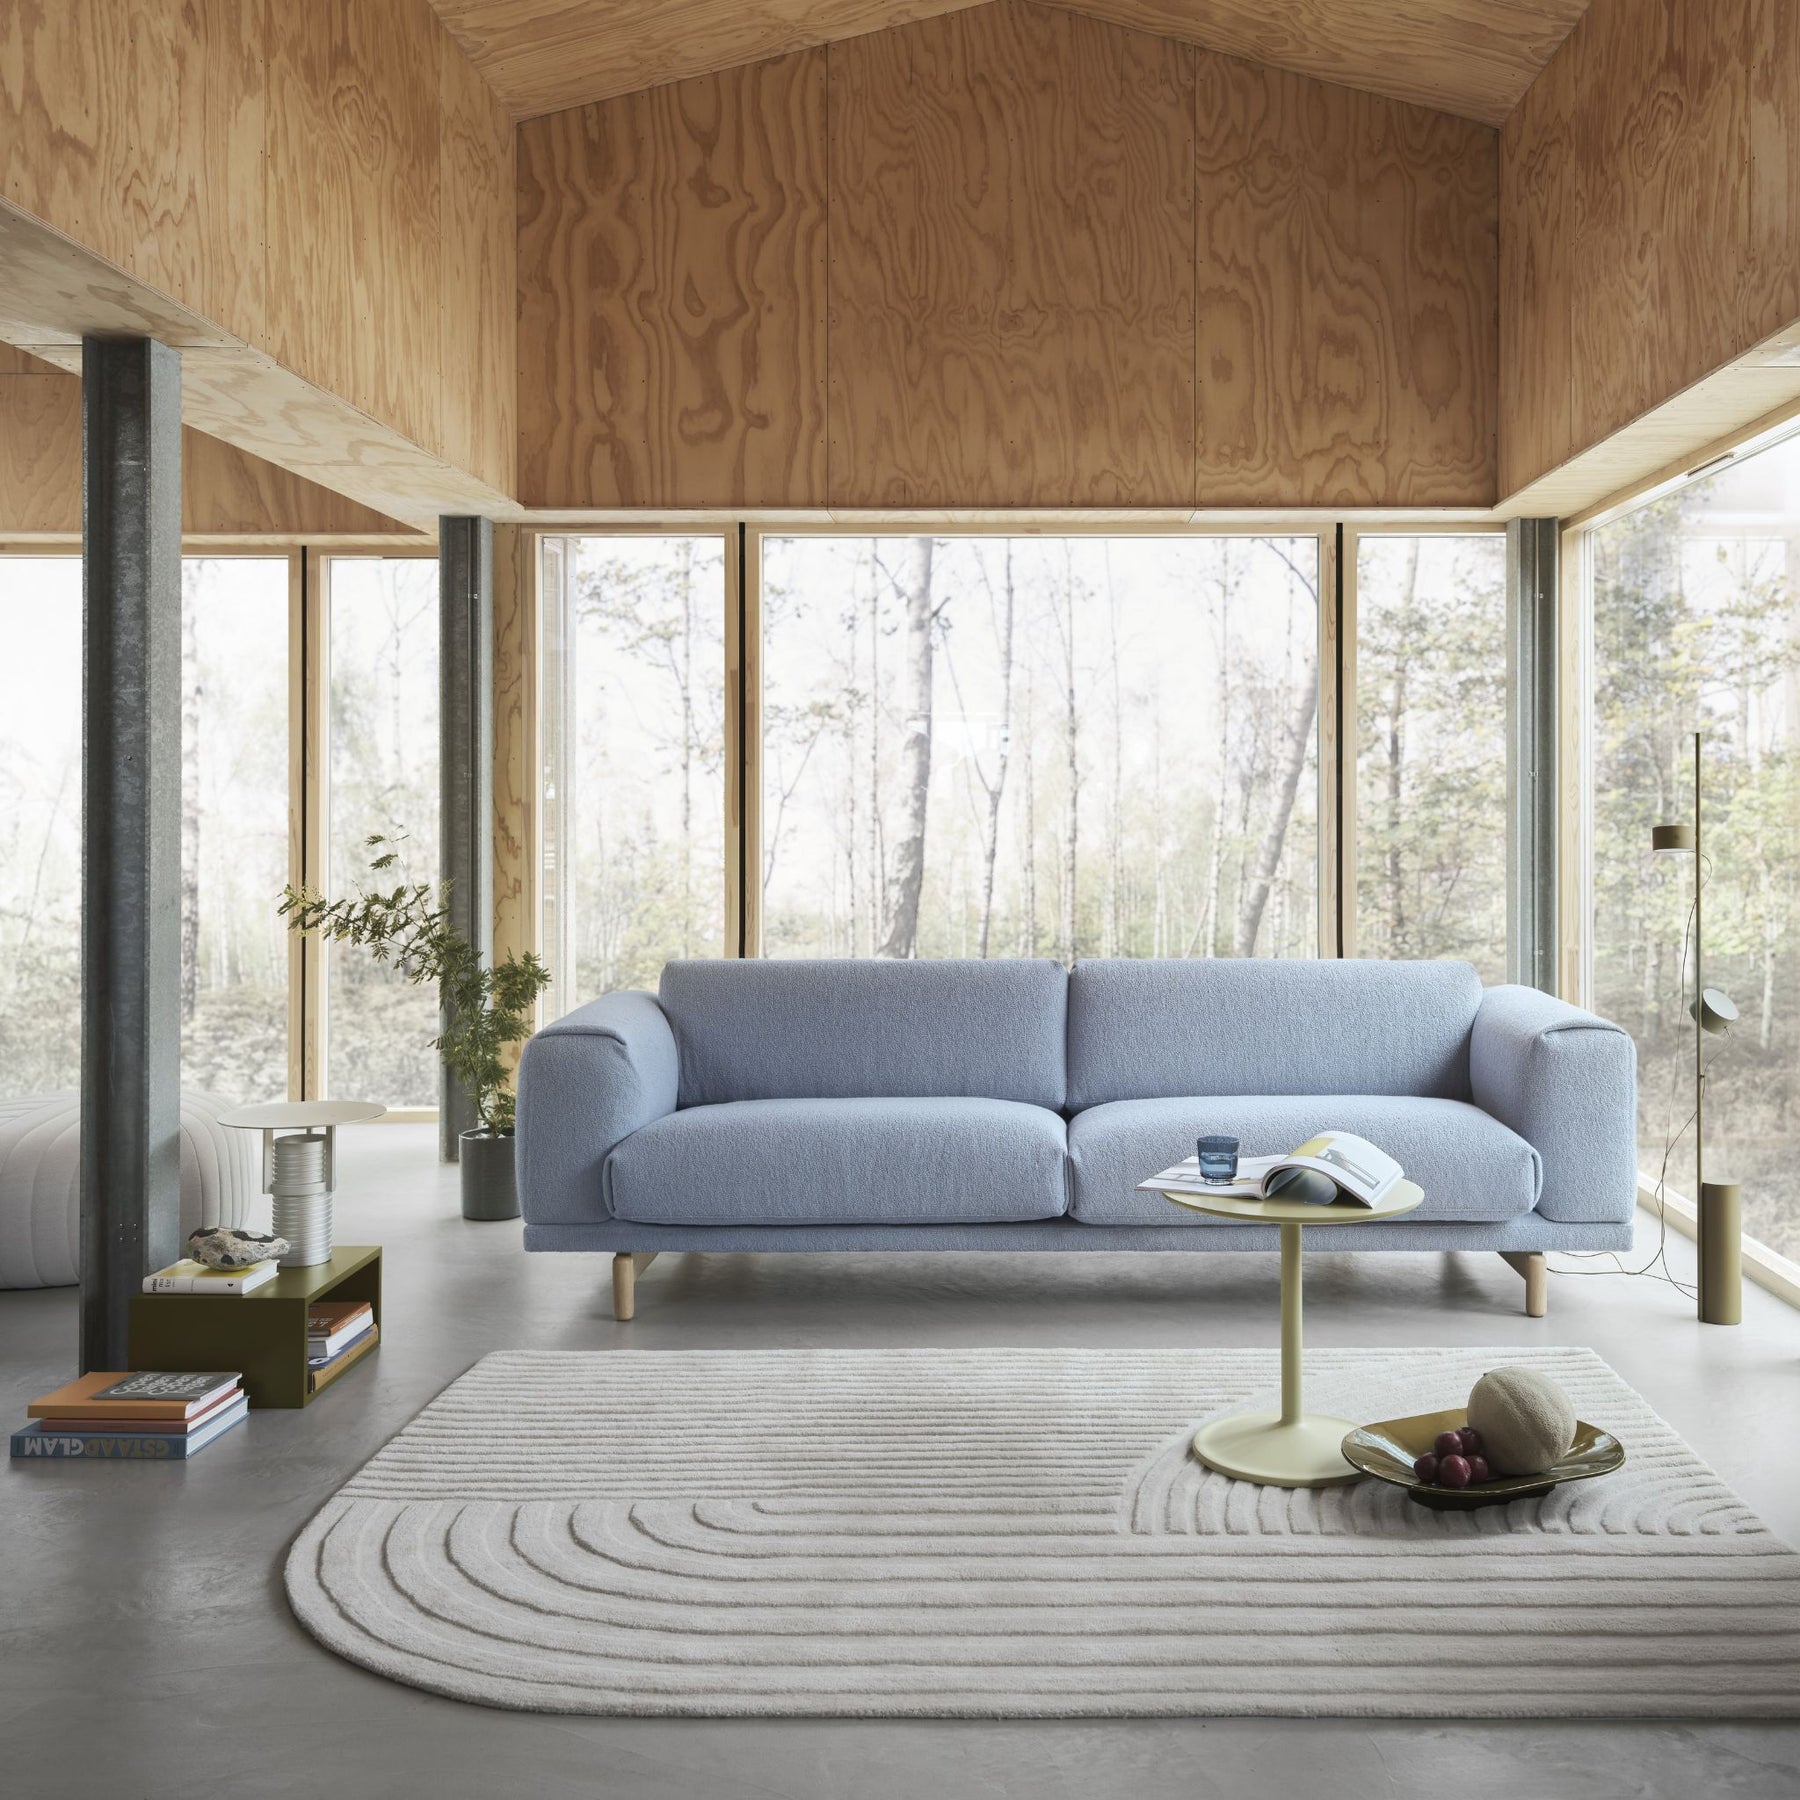 Muuto Relevo Rug Off White in Living Room with Rest Sofa